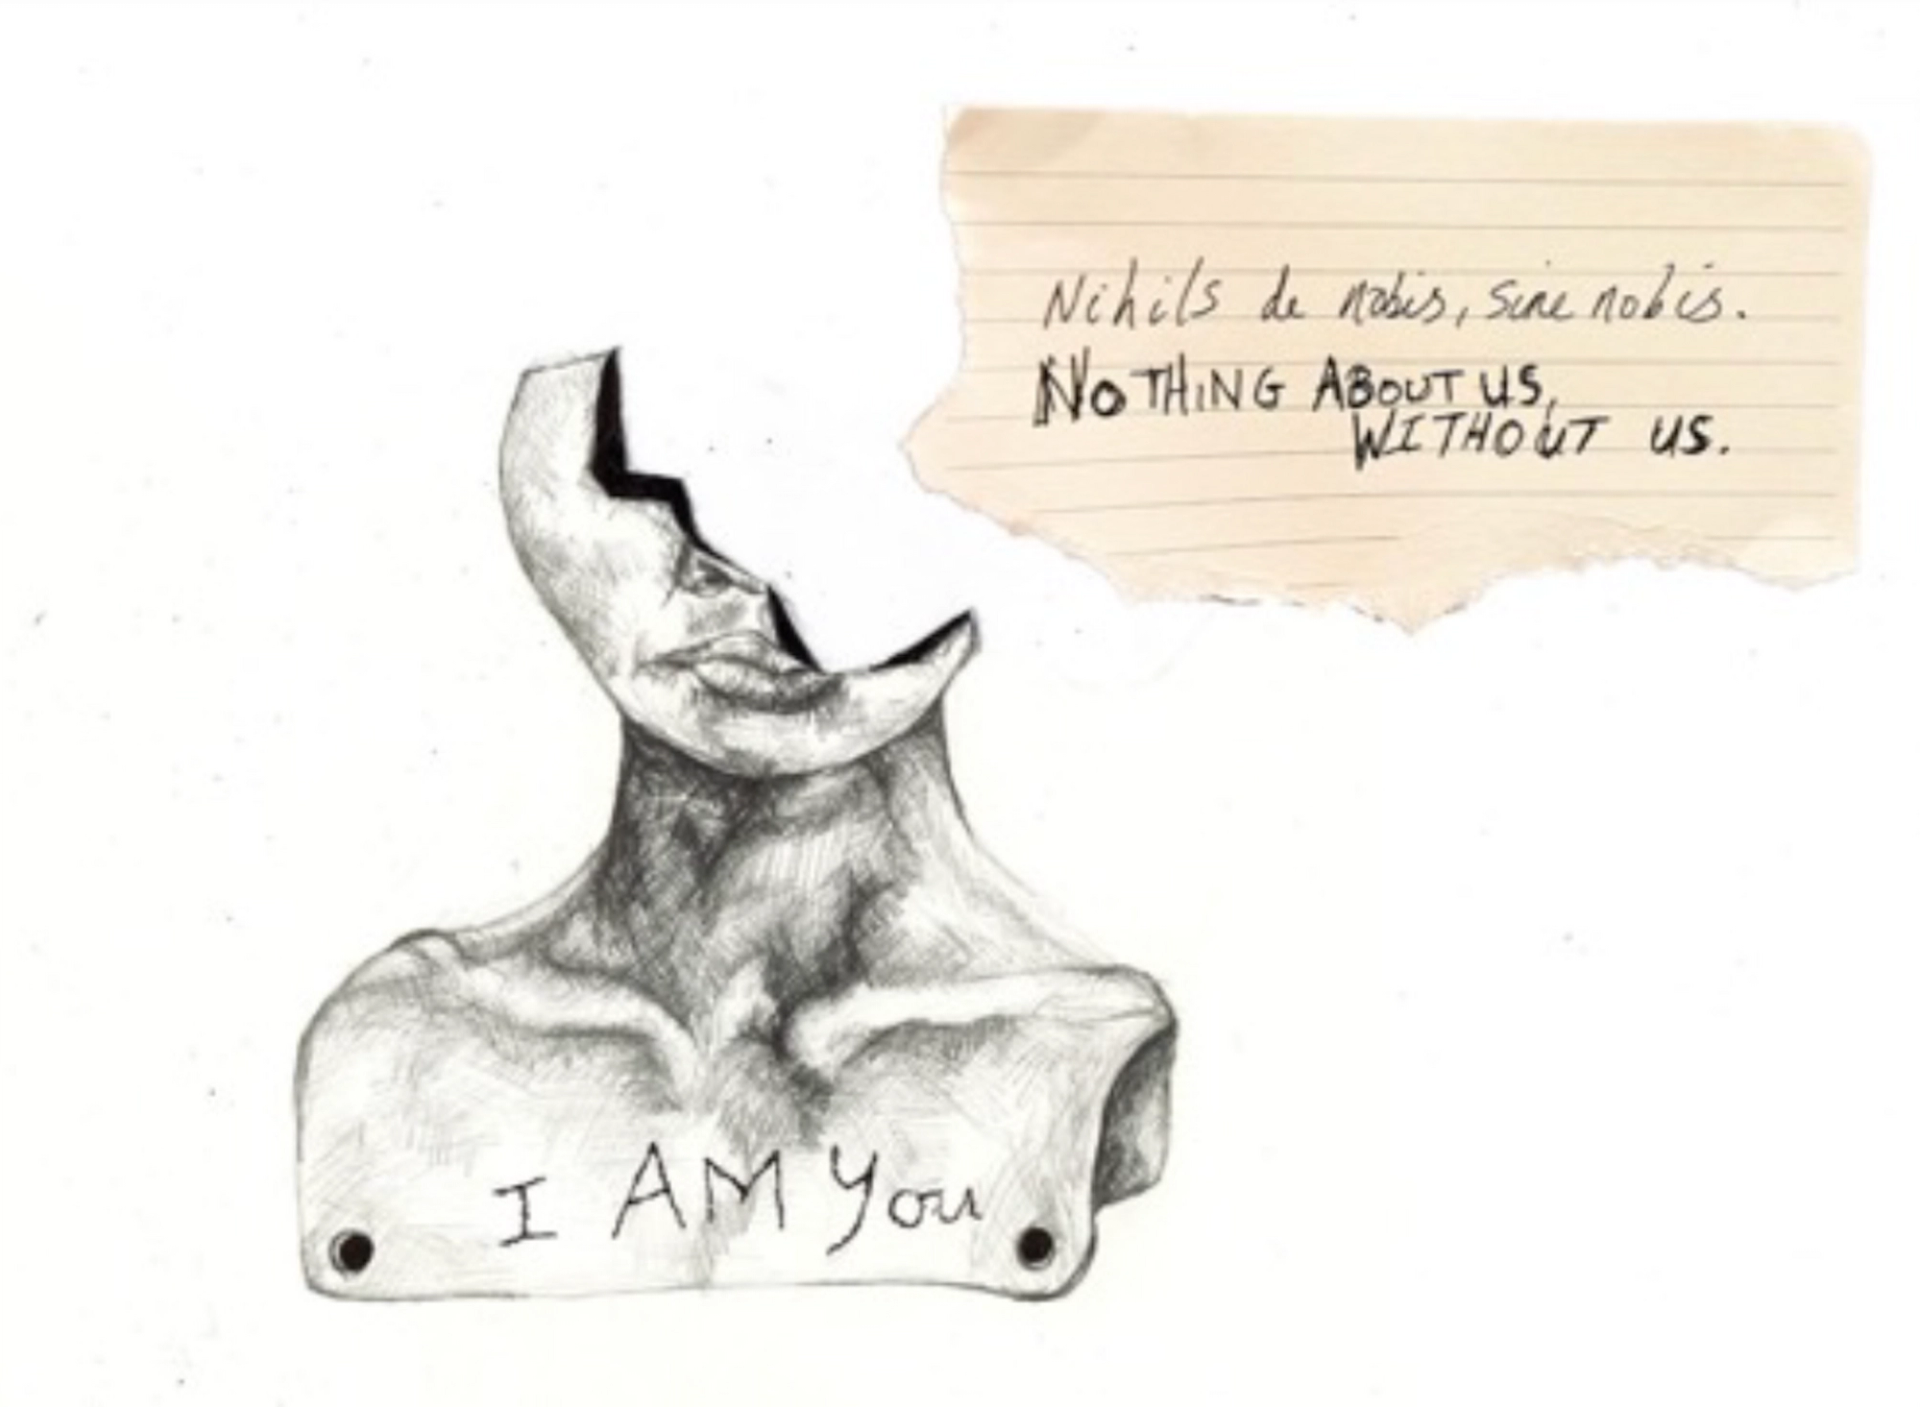 Sketch of a bust with head shattered and text 'Nothing about us, without us' on notebook paper